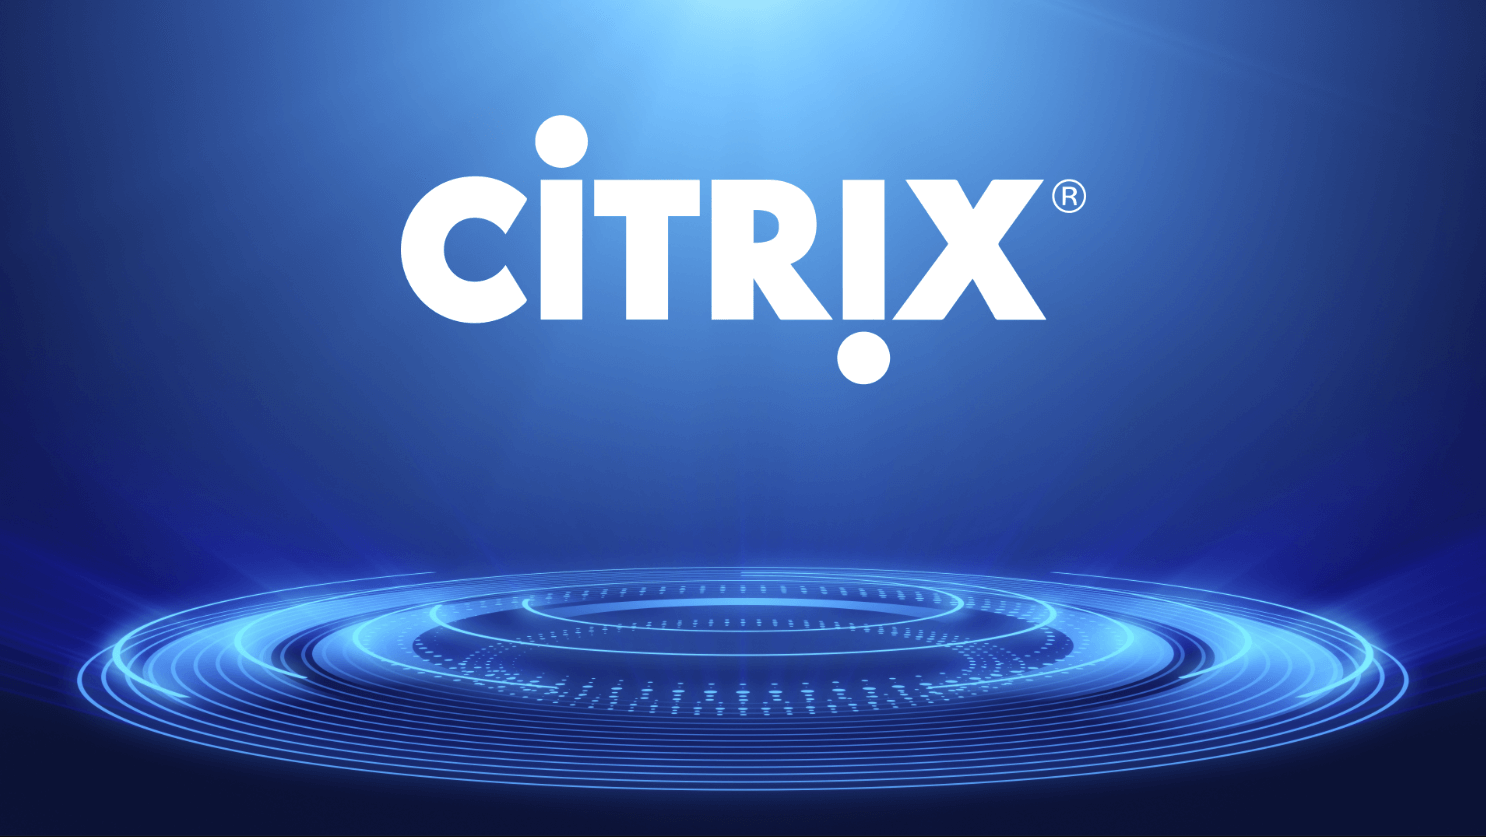 Continuous monitoring of Citrix availability and user experience.